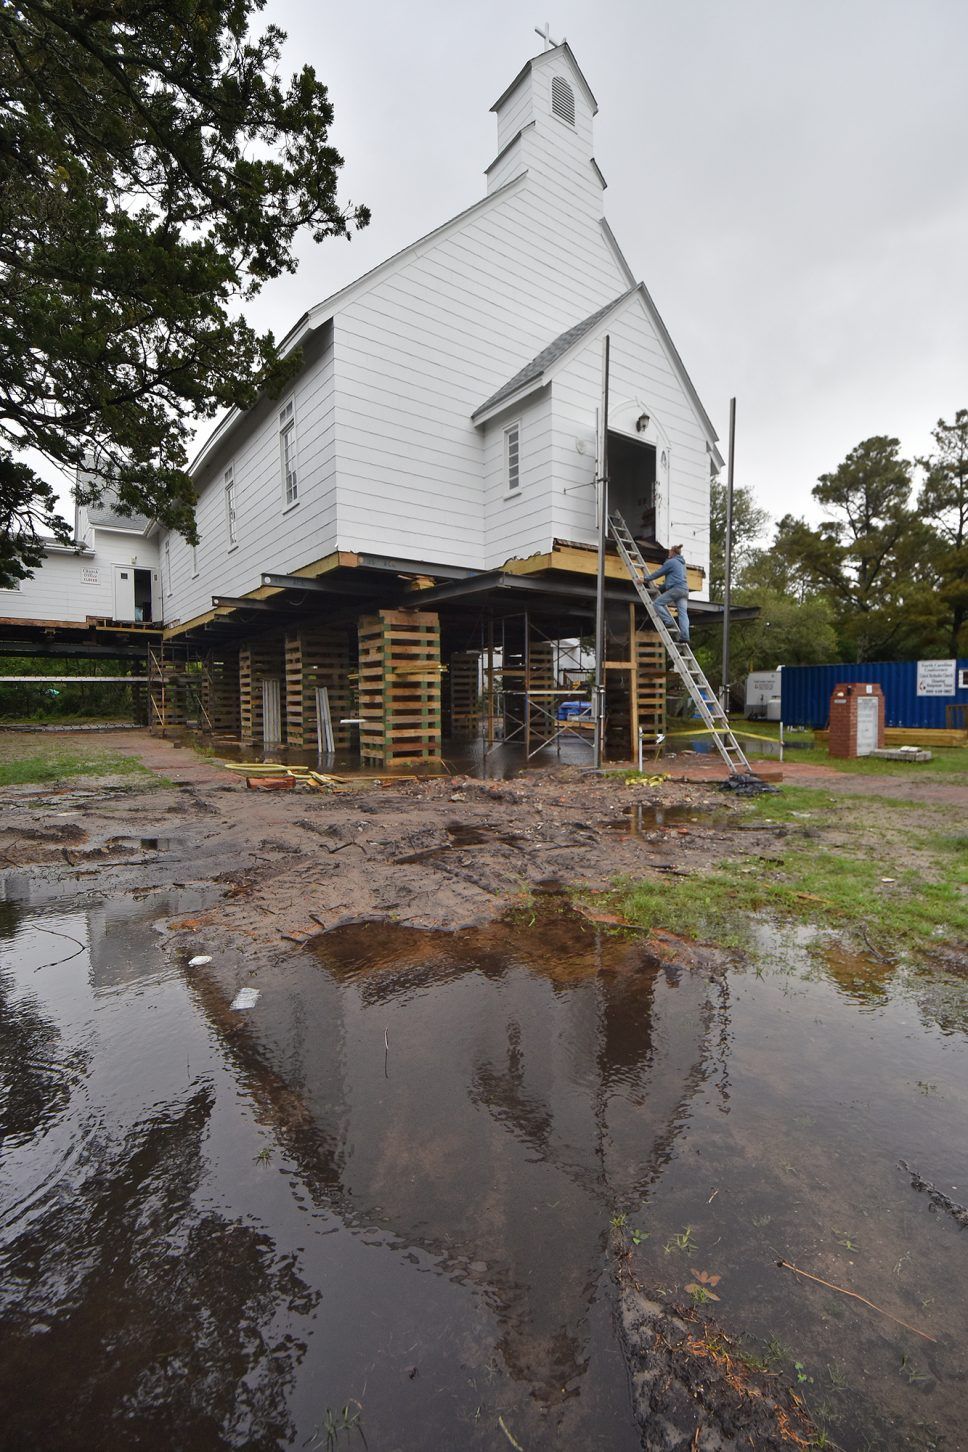 William Adams with Landmark Building and Design descends from the Ocracoke United Methodist Church on School Road where it has been elevated to accommodate storm surge after damage sustained during Hurricane Dorian in 2019. Image by Dylan Ray. United States, undated.